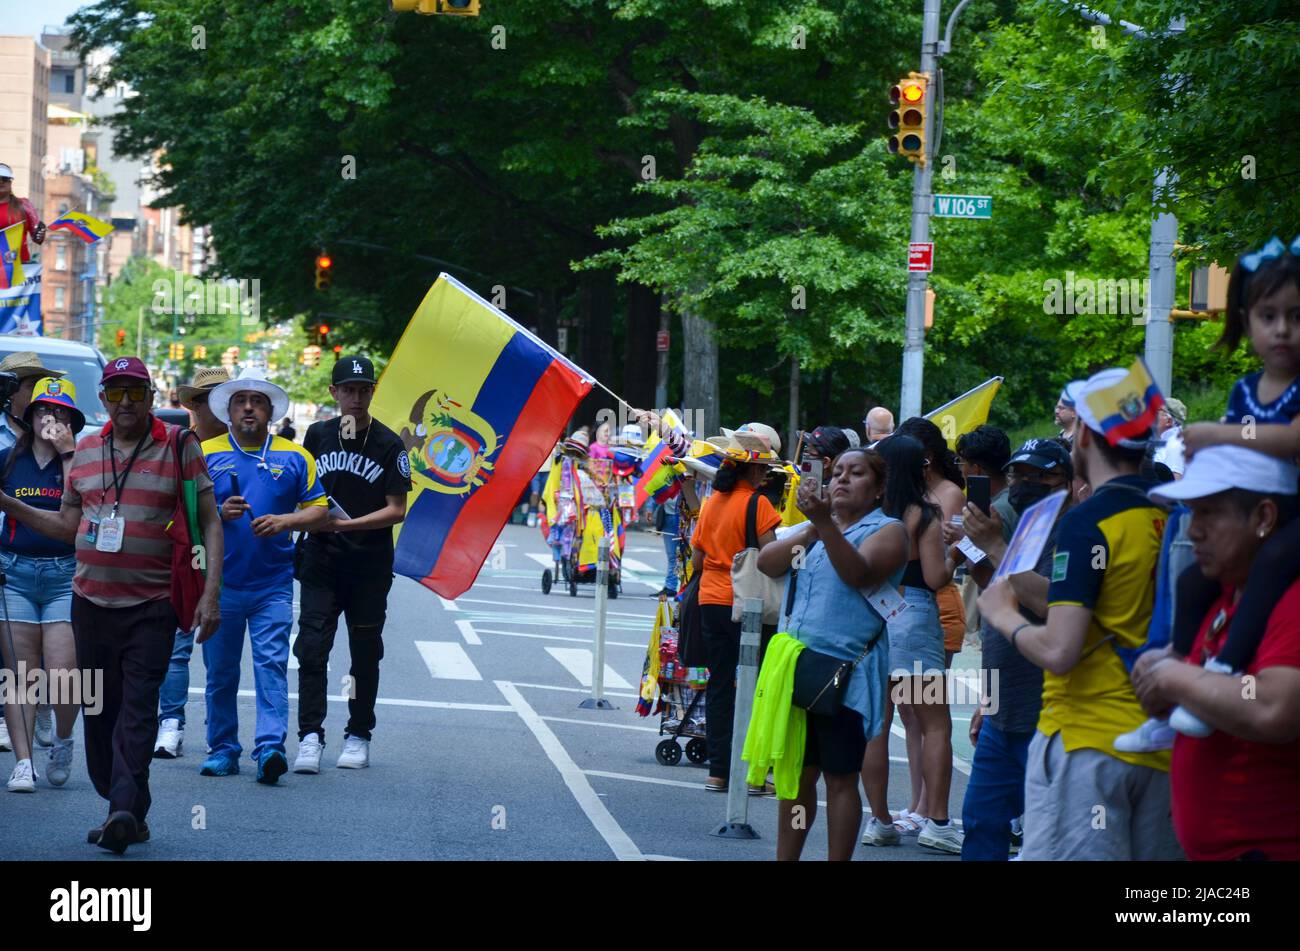 Spectators gathered to celebrate the annual Ecuadorian Independence Day